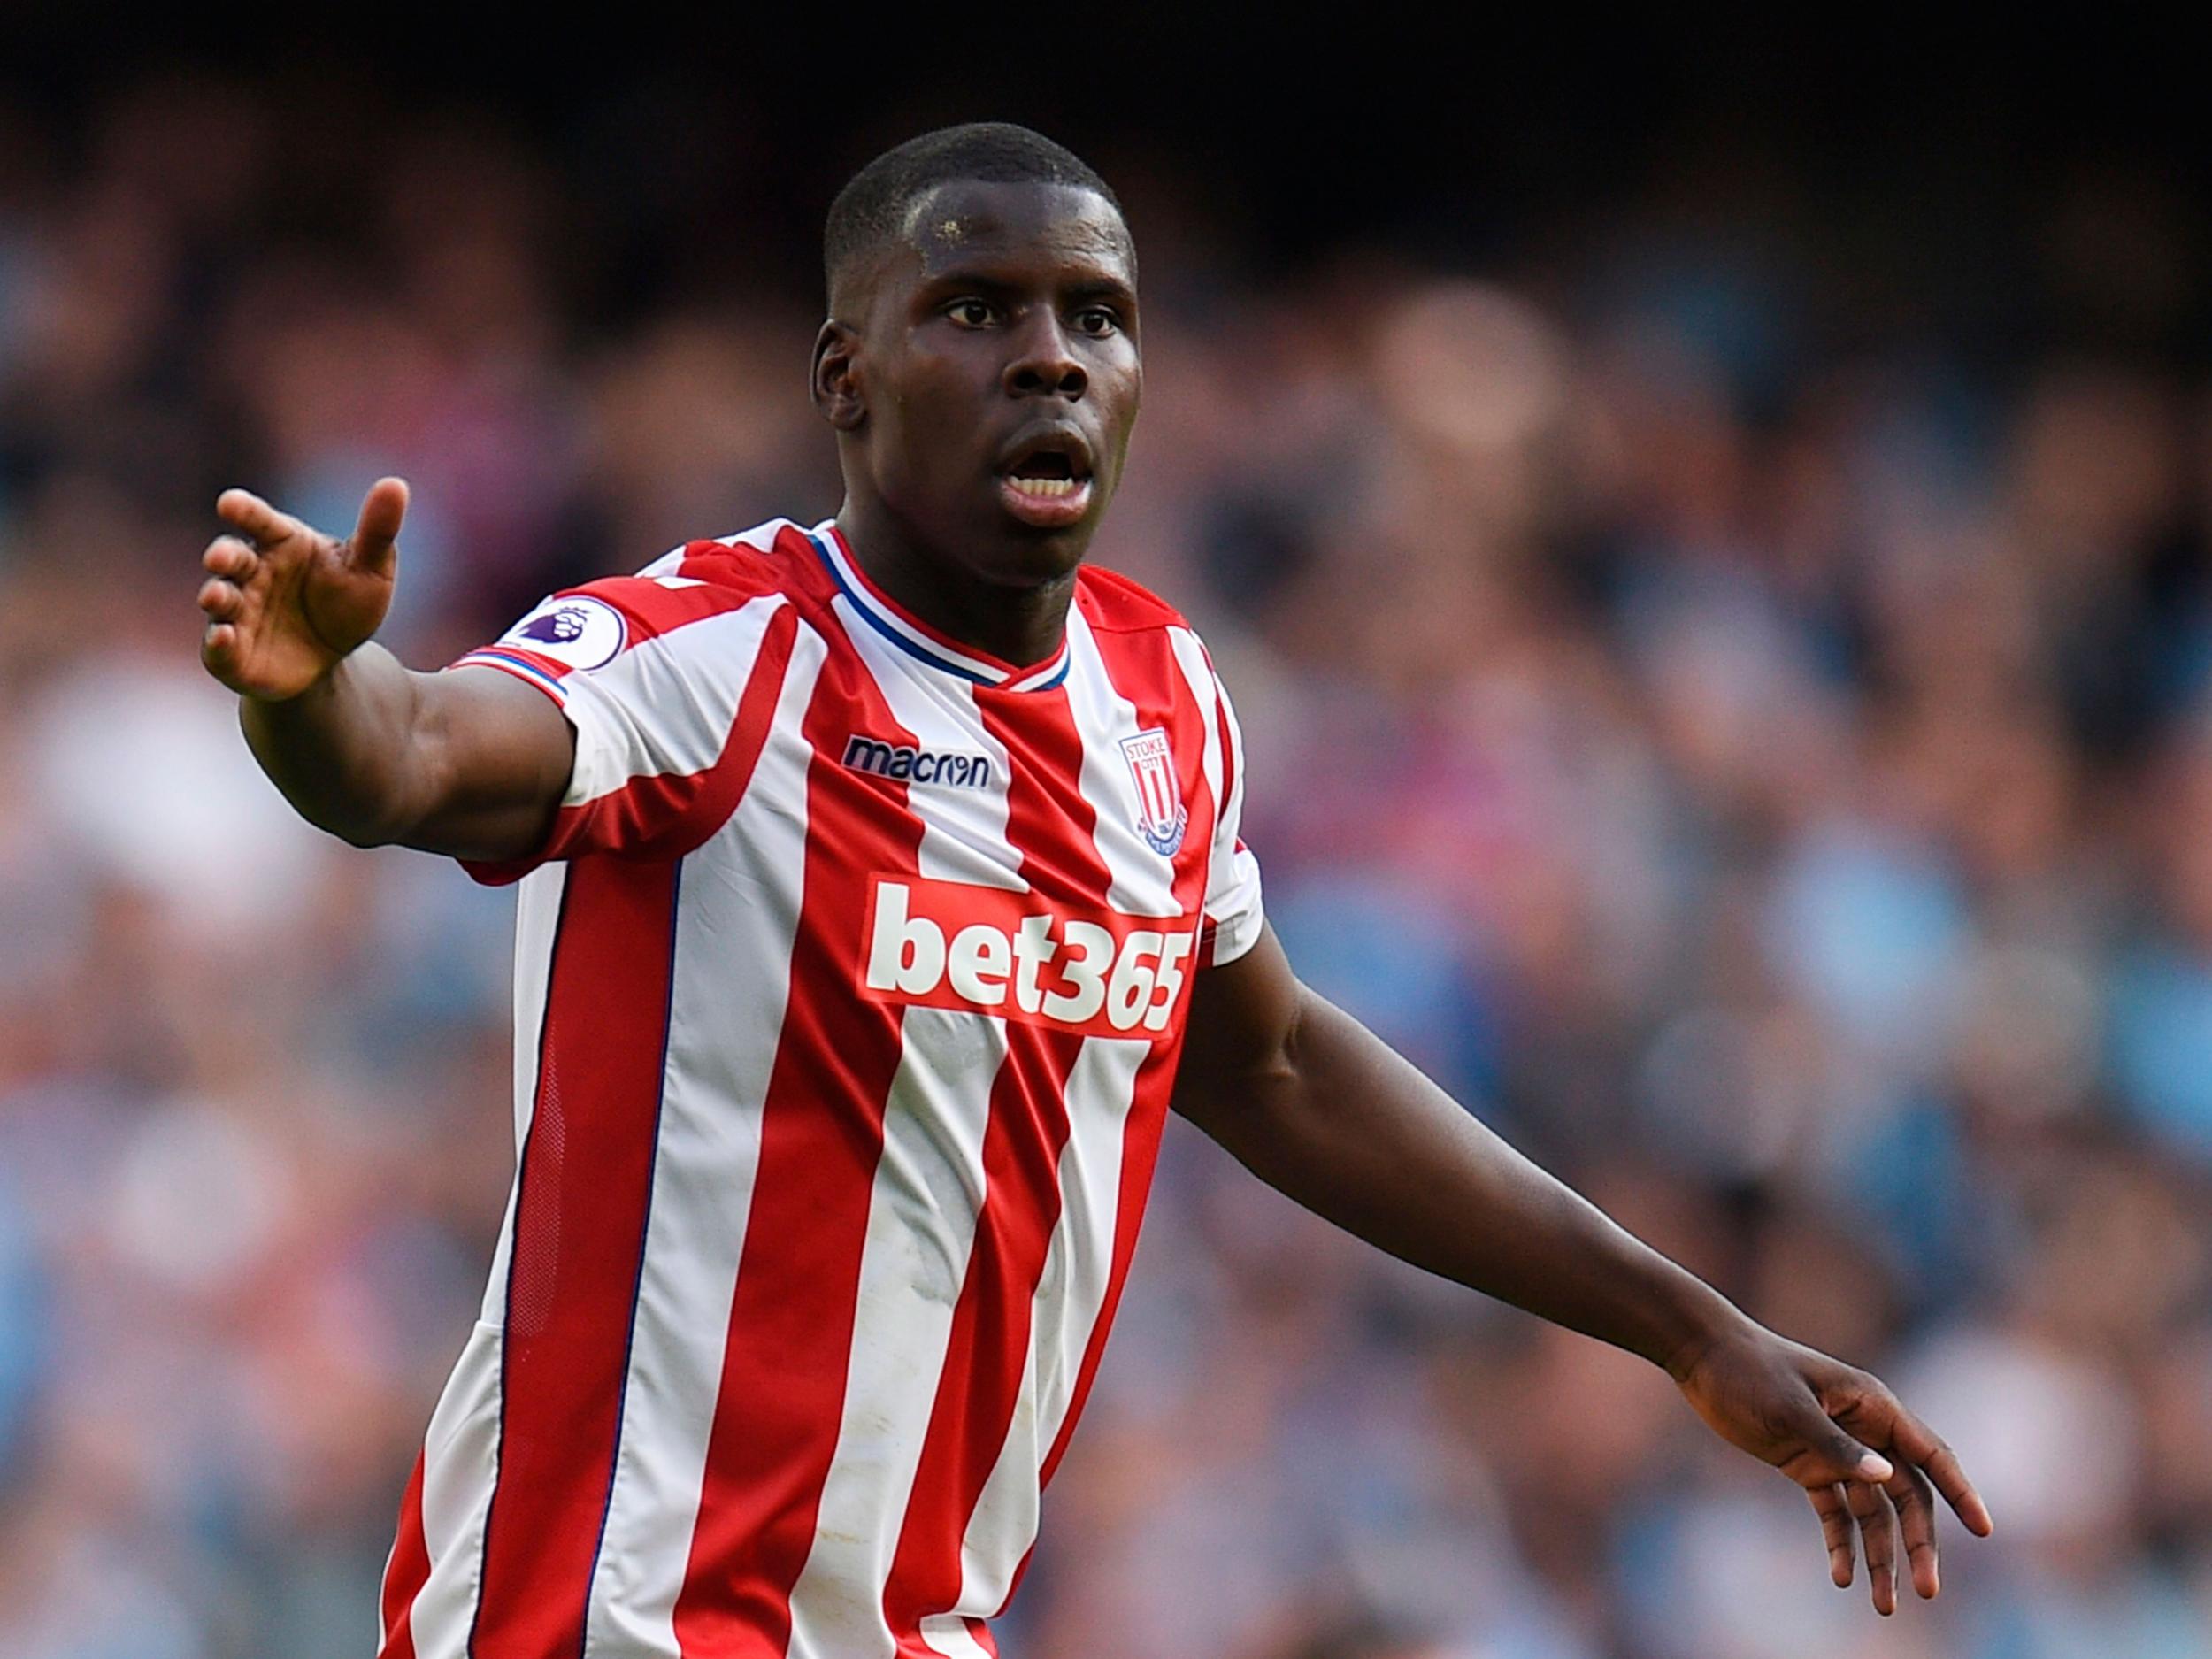 Everton transfer news: Kurt Zouma finally completes loan move from Chelsea 23 hours after deadline